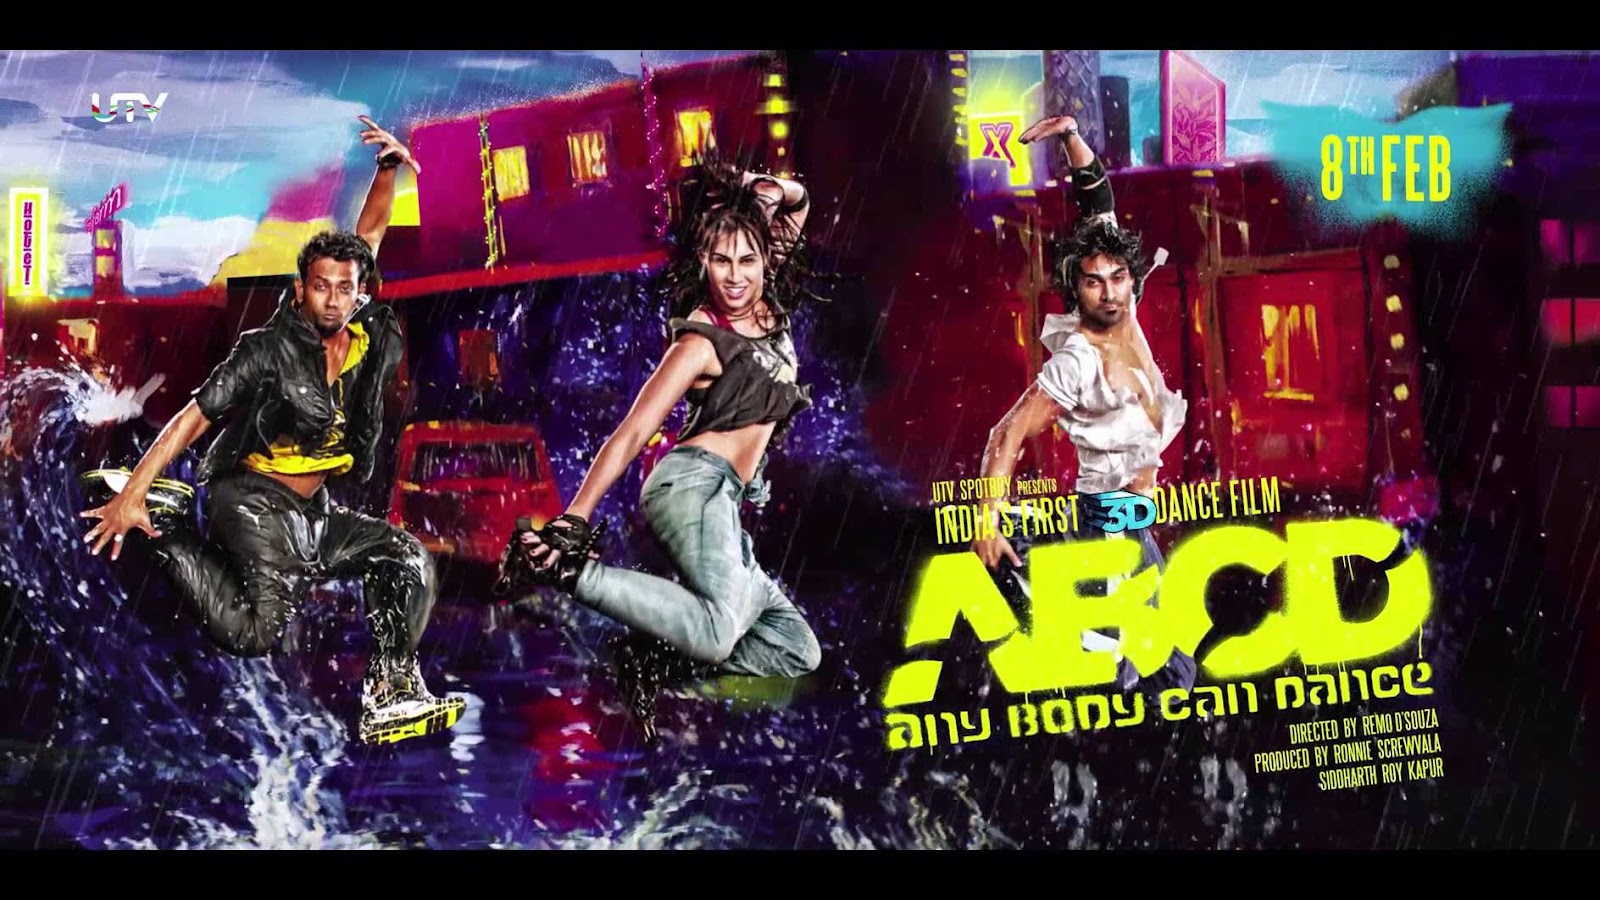 ABCD - Any Body Can Dance - 2 movie free